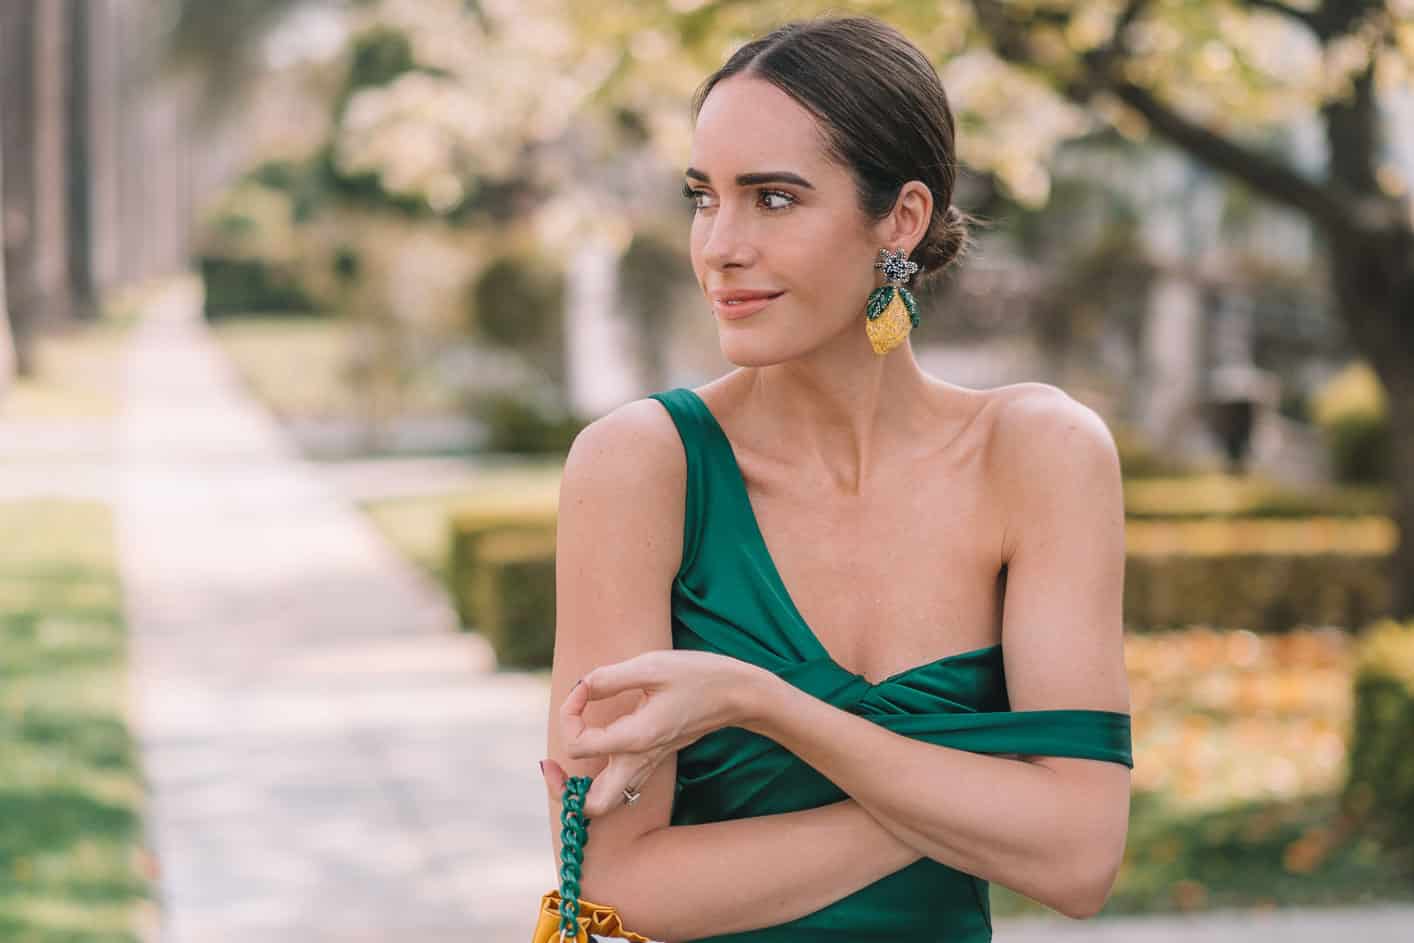 Louise Roe fashion tips on spring and summer wedding guest dresses